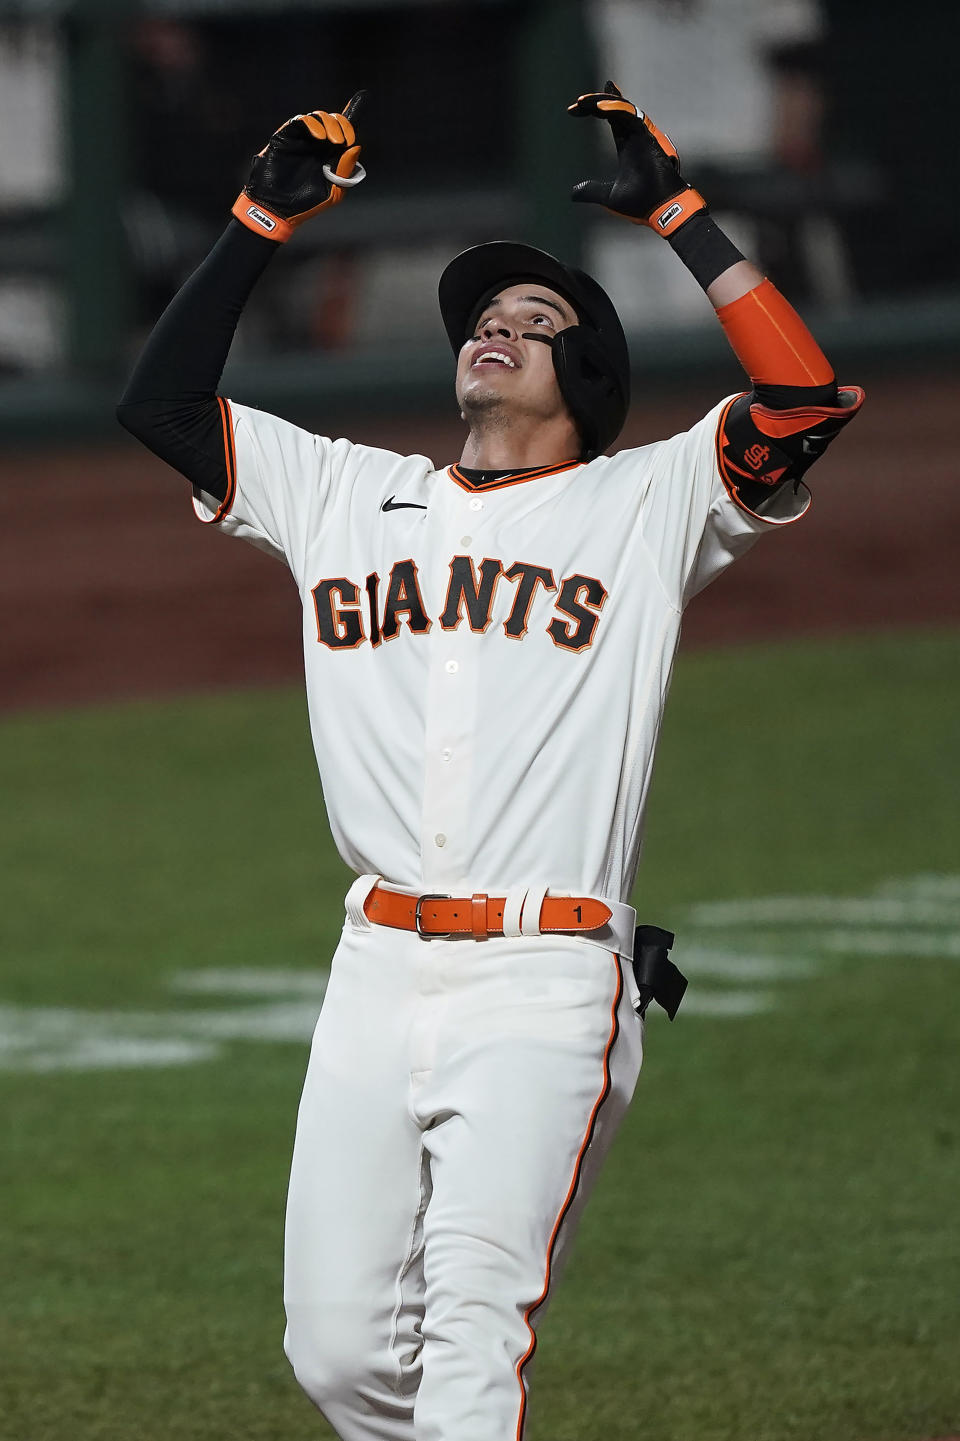 San Francisco Giants' Mauricio Dubon points to the sky as he crosses home plate after hitting a three-run home run against the Colorado Rockies during the fifth inning of a baseball game Wednesday, Sept. 23, 2020, in San Francisco. (AP Photo/Tony Avelar)